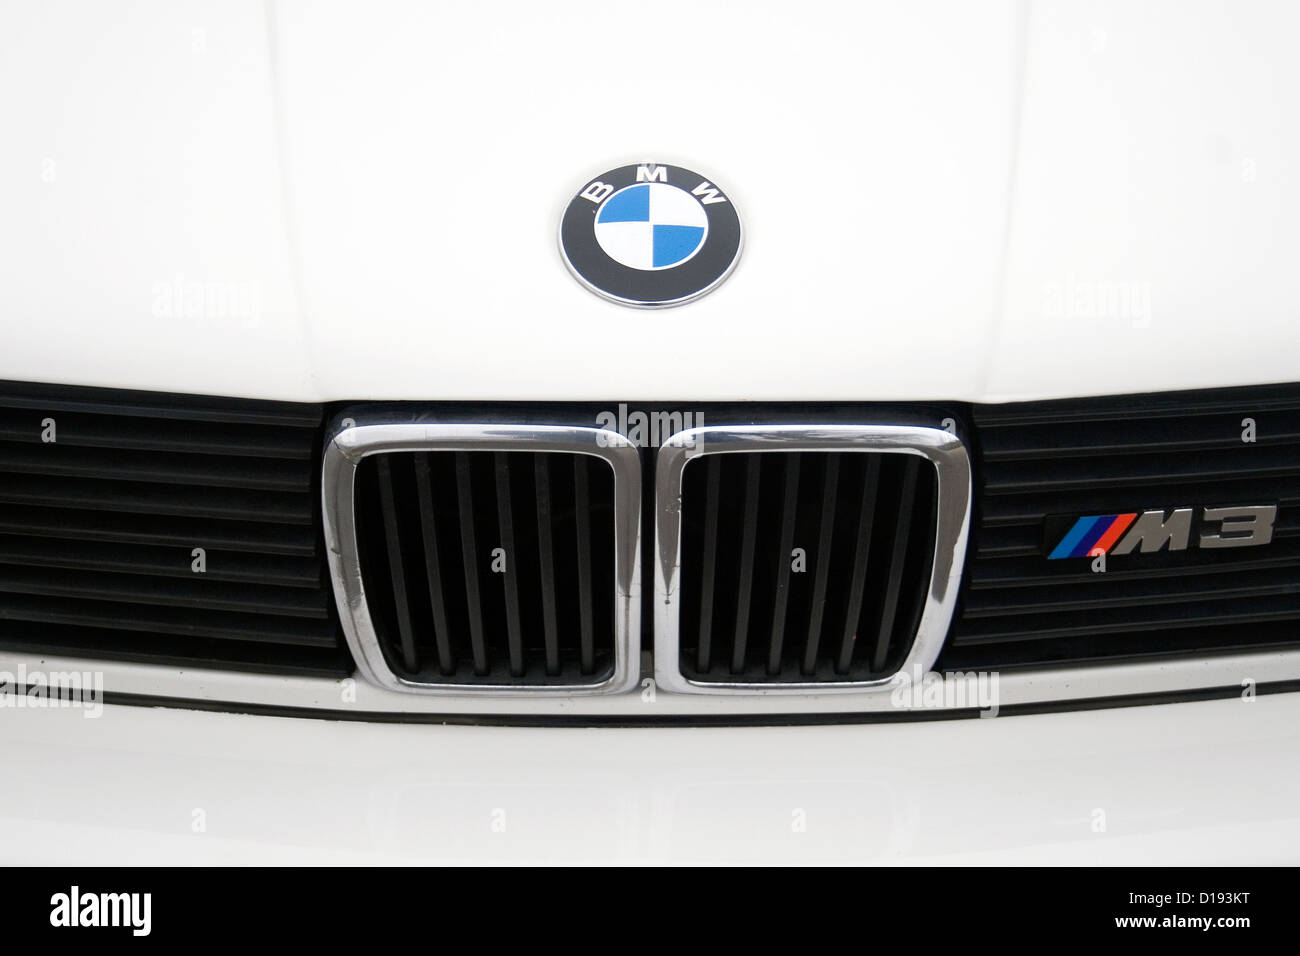 The front grill and badge of a classic white BMW M3 car Stock Photo - Alamy